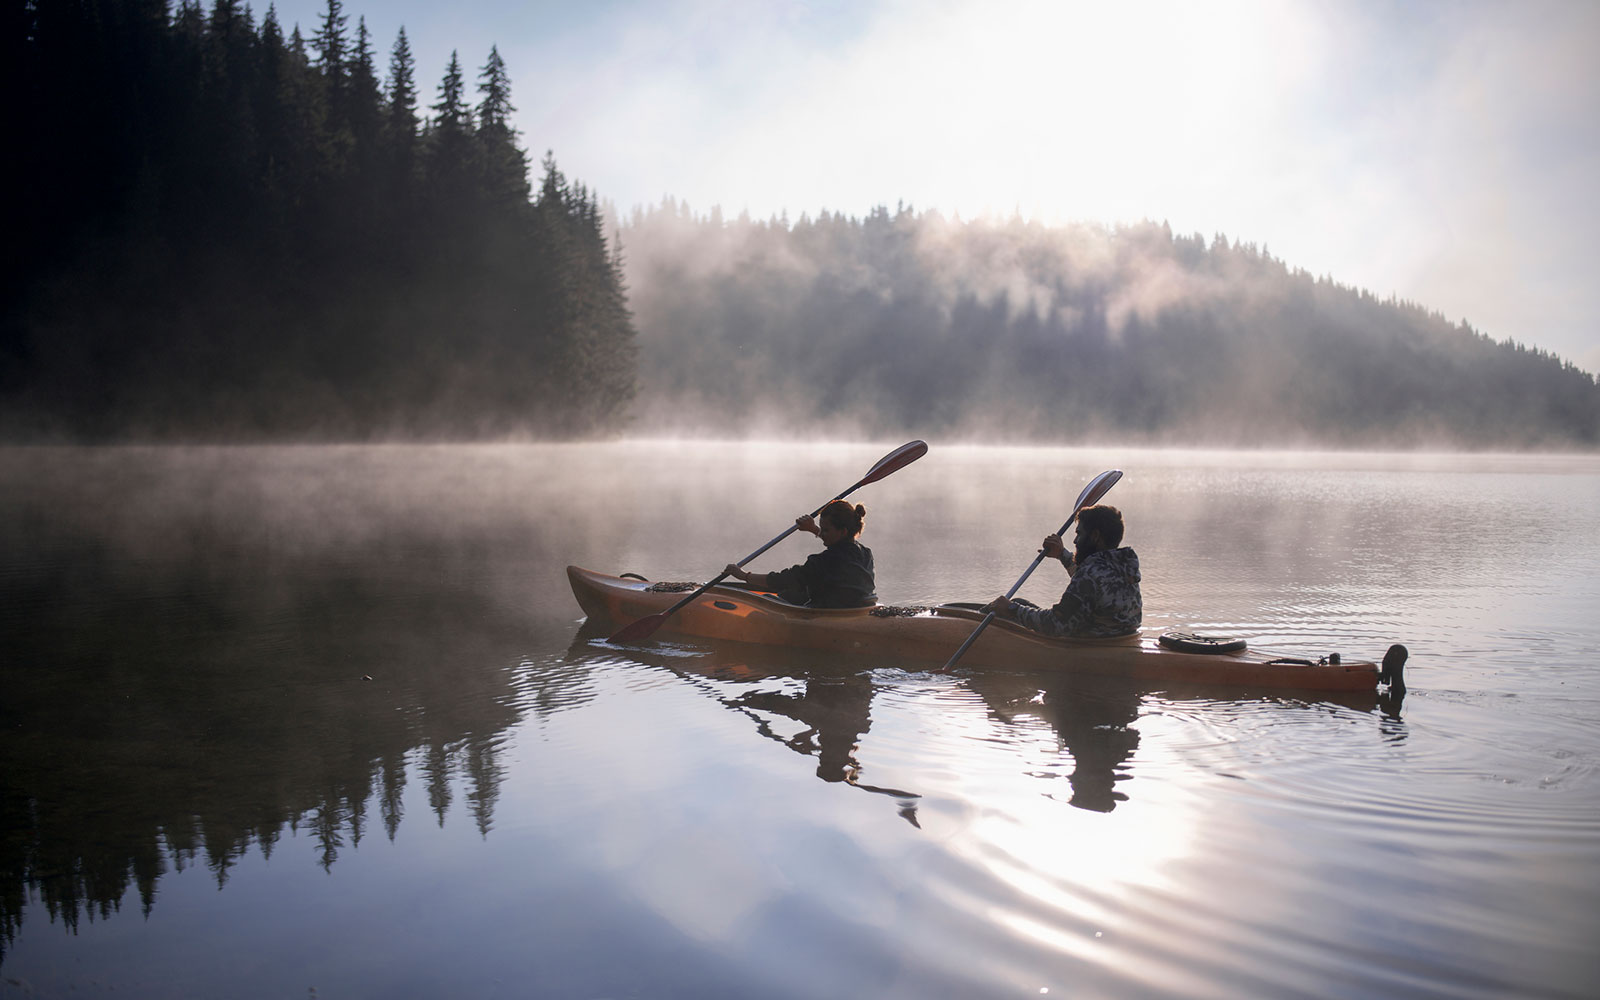 Two people rowing in a canoe.